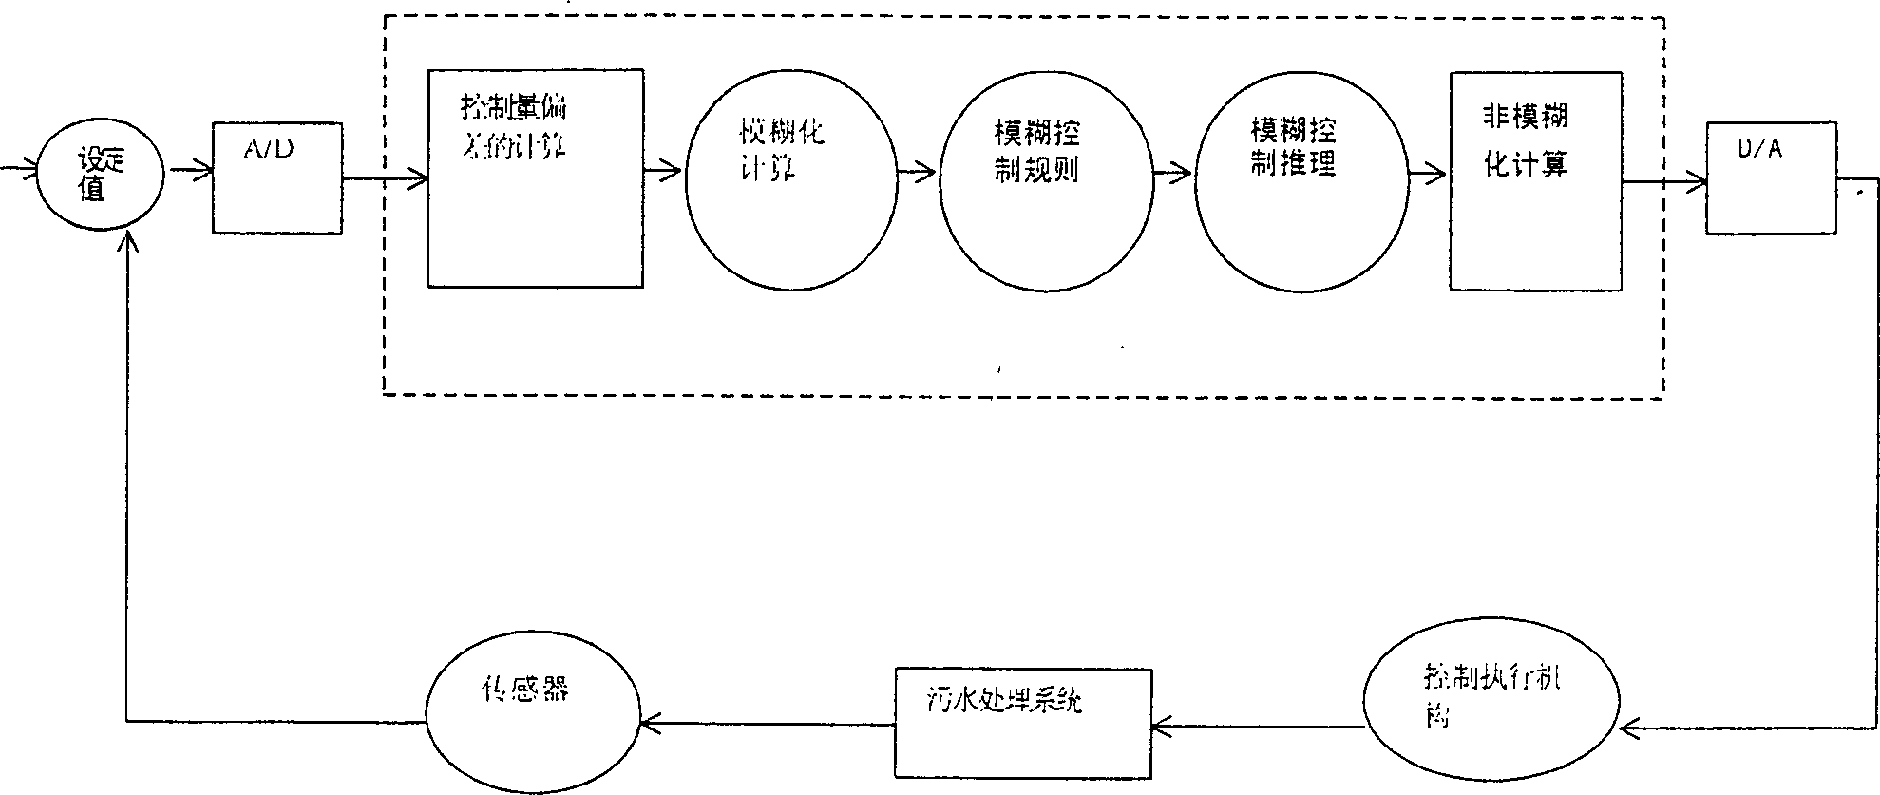 Biological denitrification technique for waste water of bean products and fuzzy control device and method